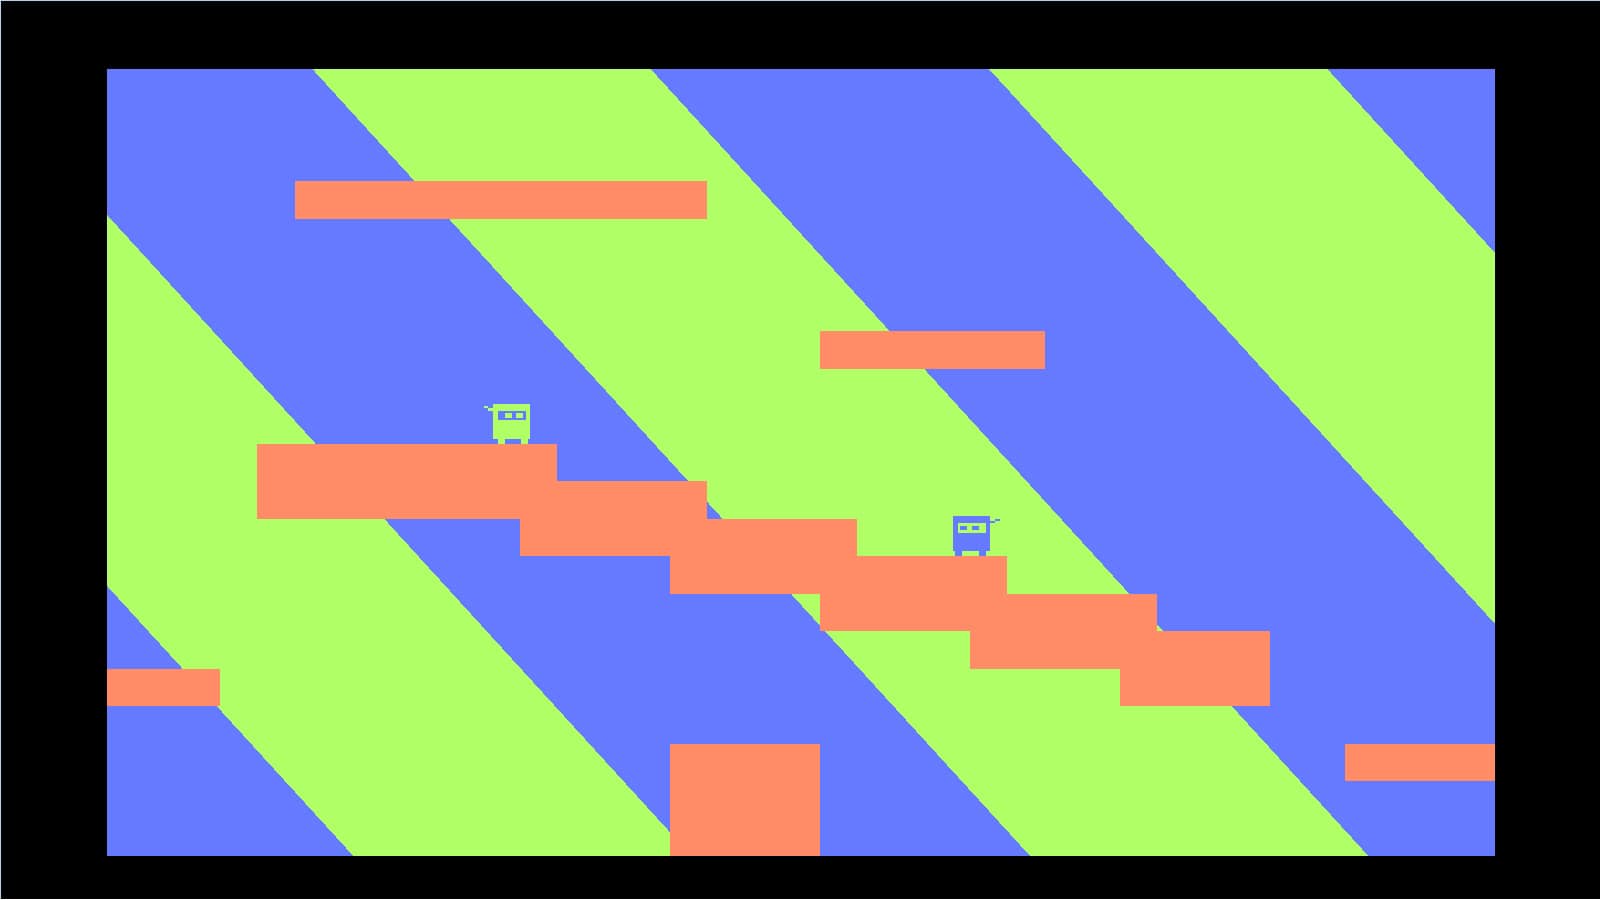 Two square green and blue ninjas face each other on a peach colored zig-zagging platform.